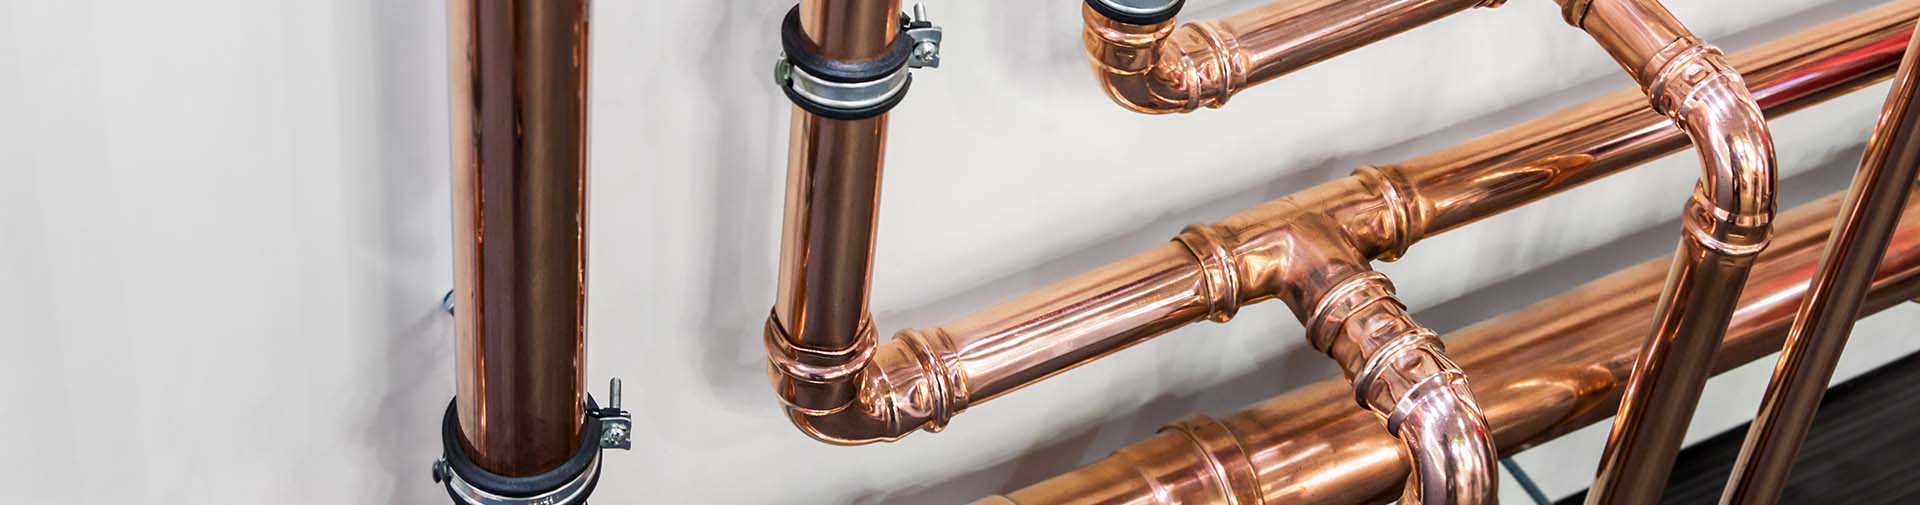 Fort Worth Plumber, Plumbing Company and Plumbing Services